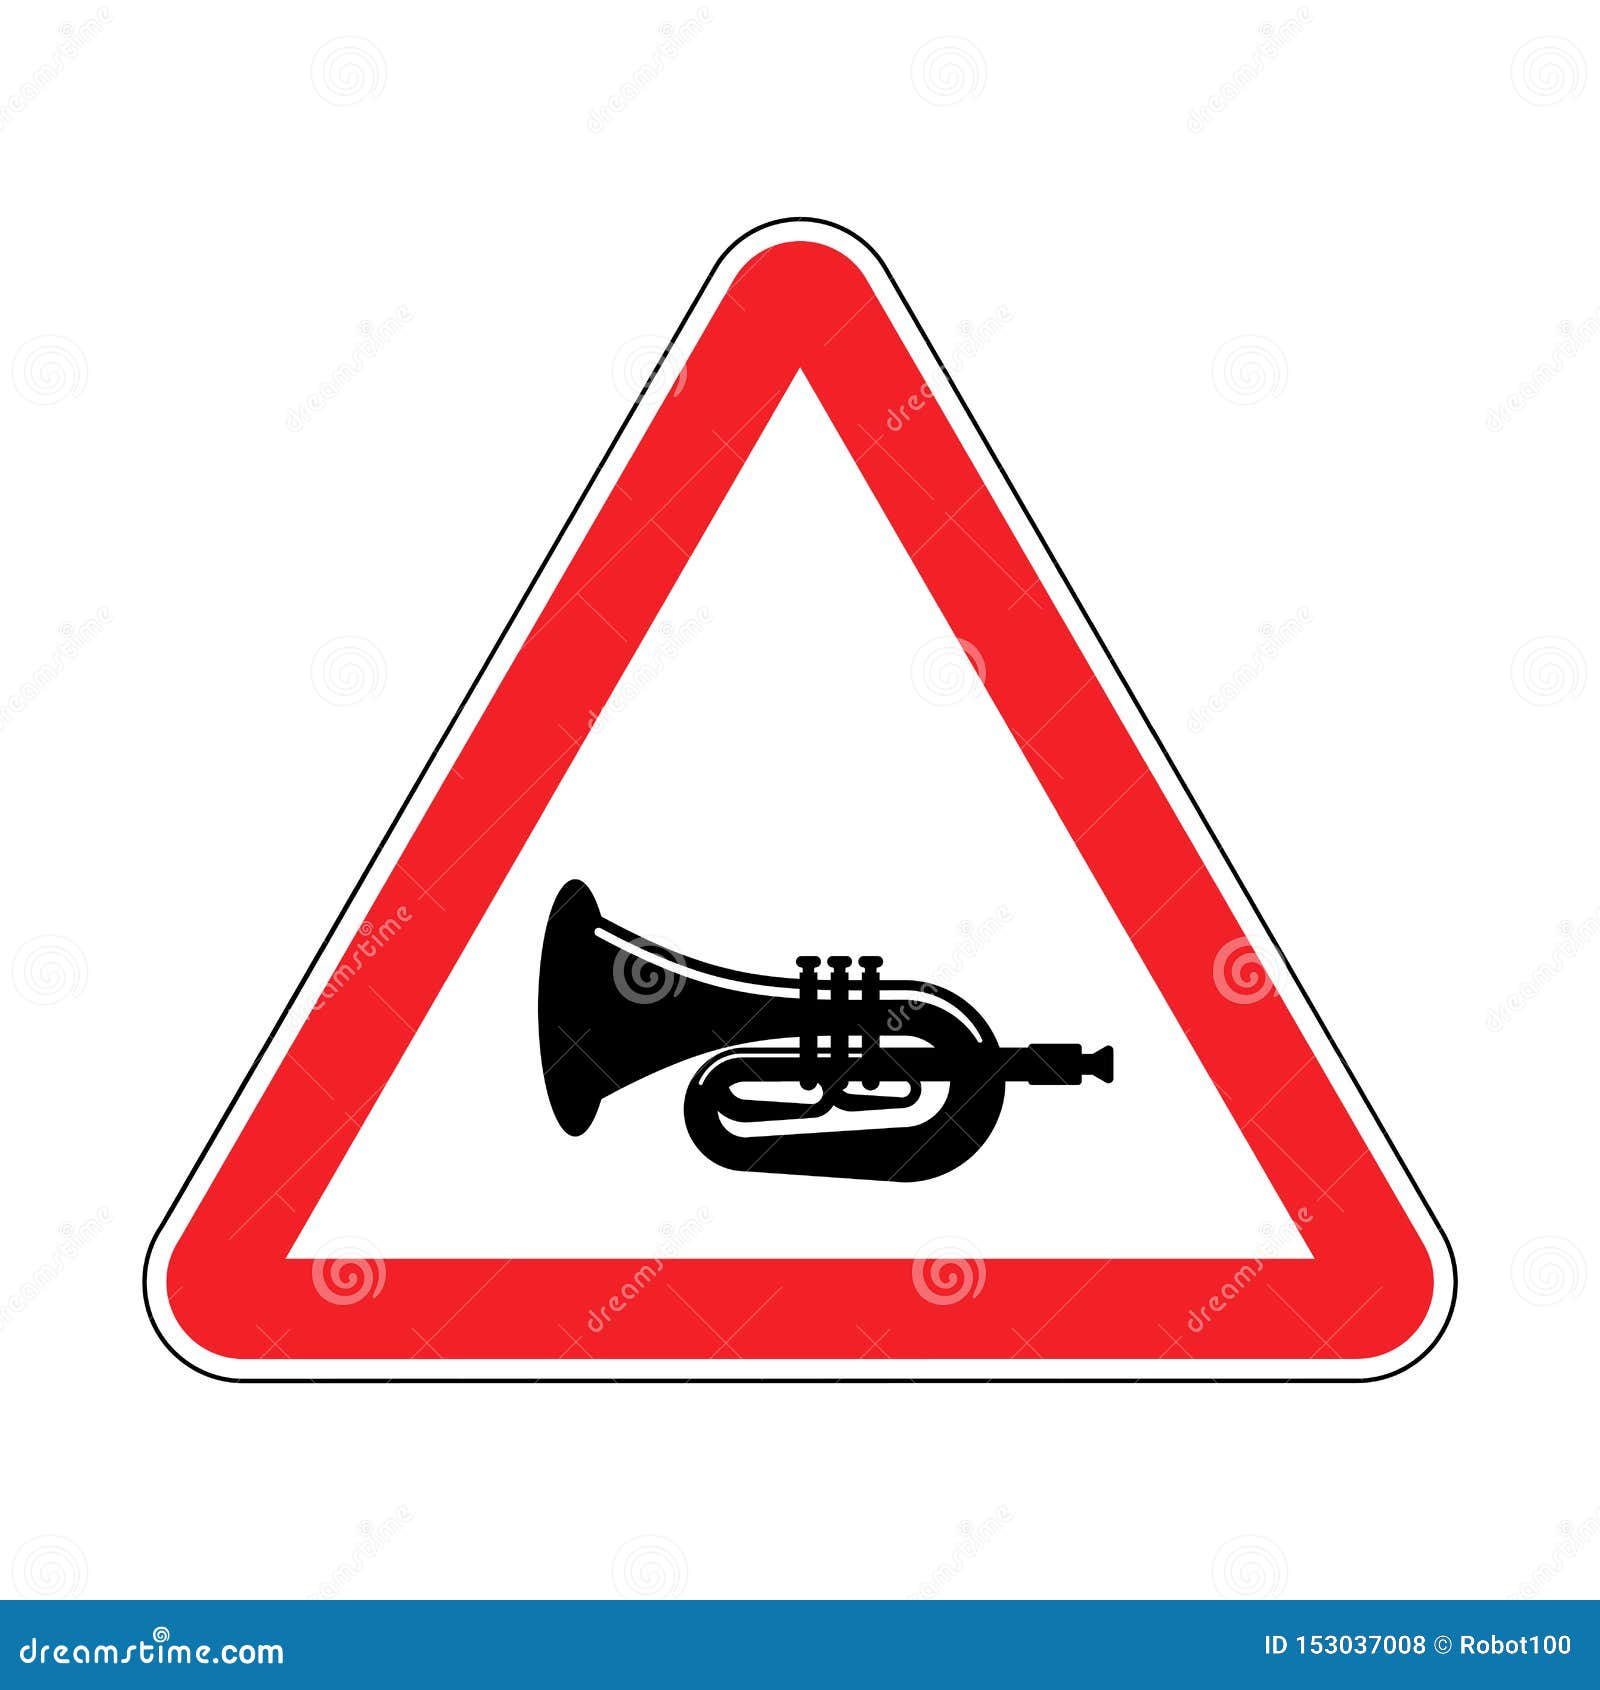 attention beep trumpet . caution hooter. red triangle road sign